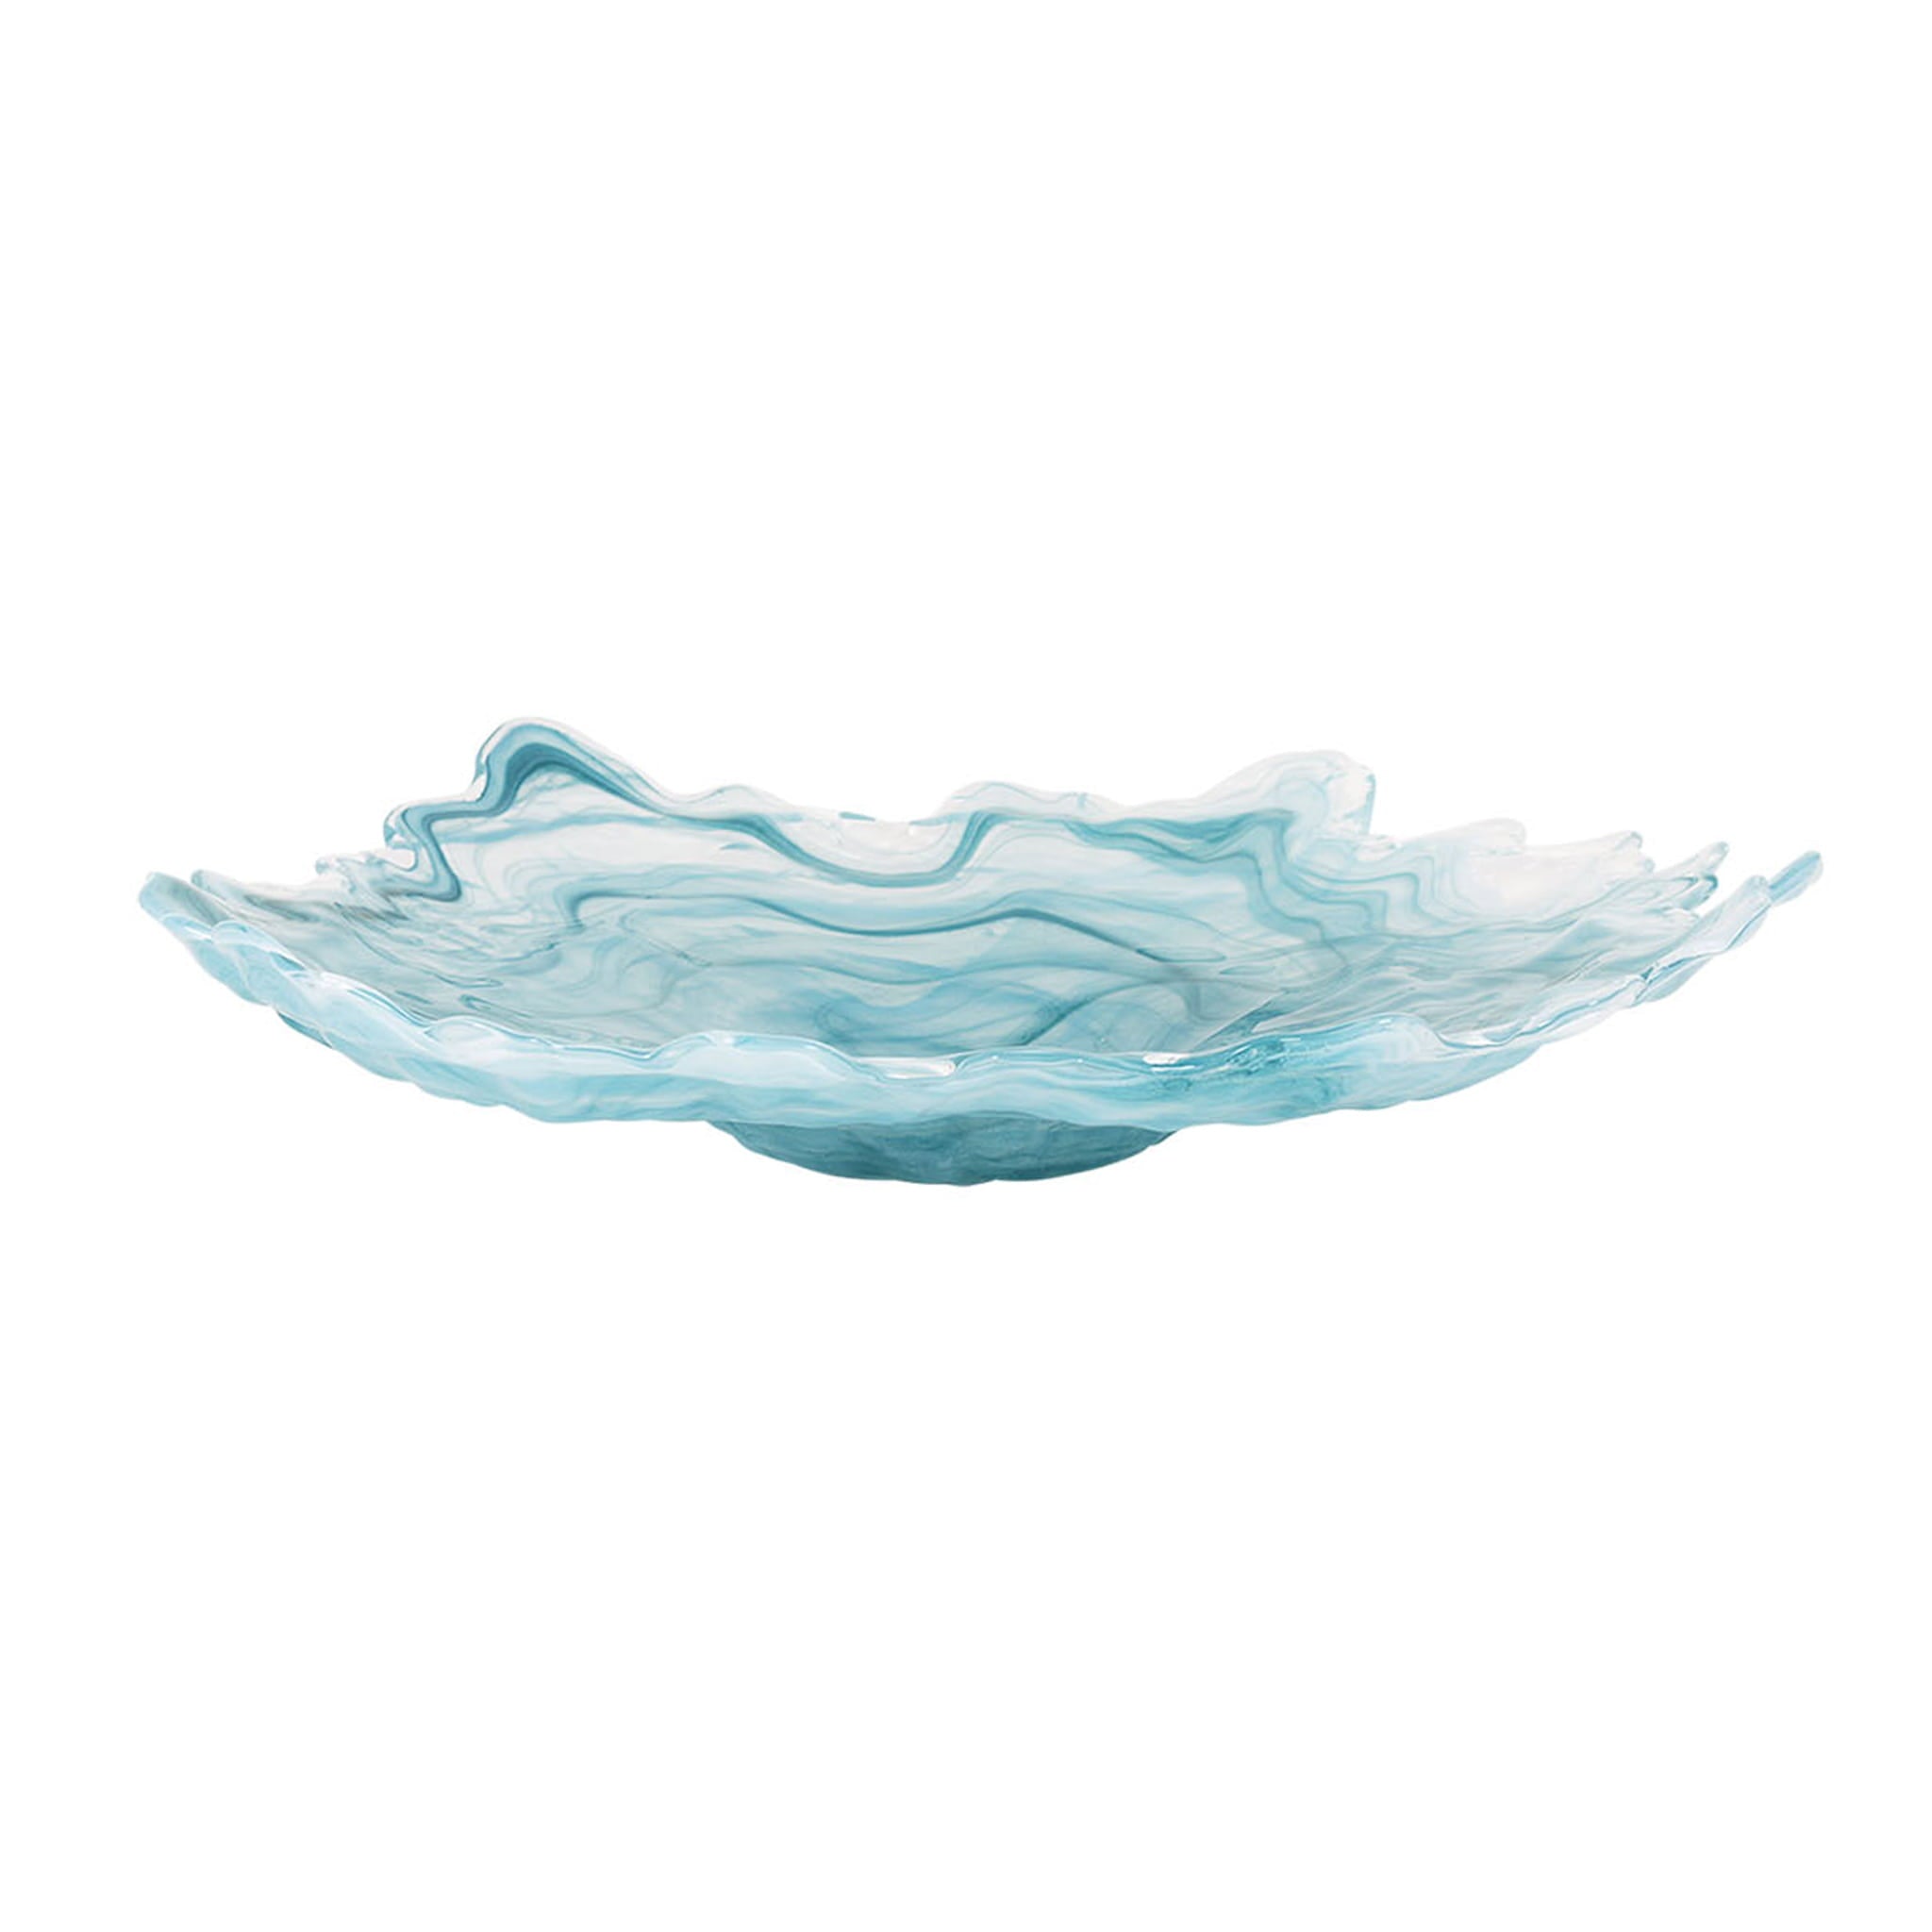 Turquoise Marble Glass Serving Tray, 39cm